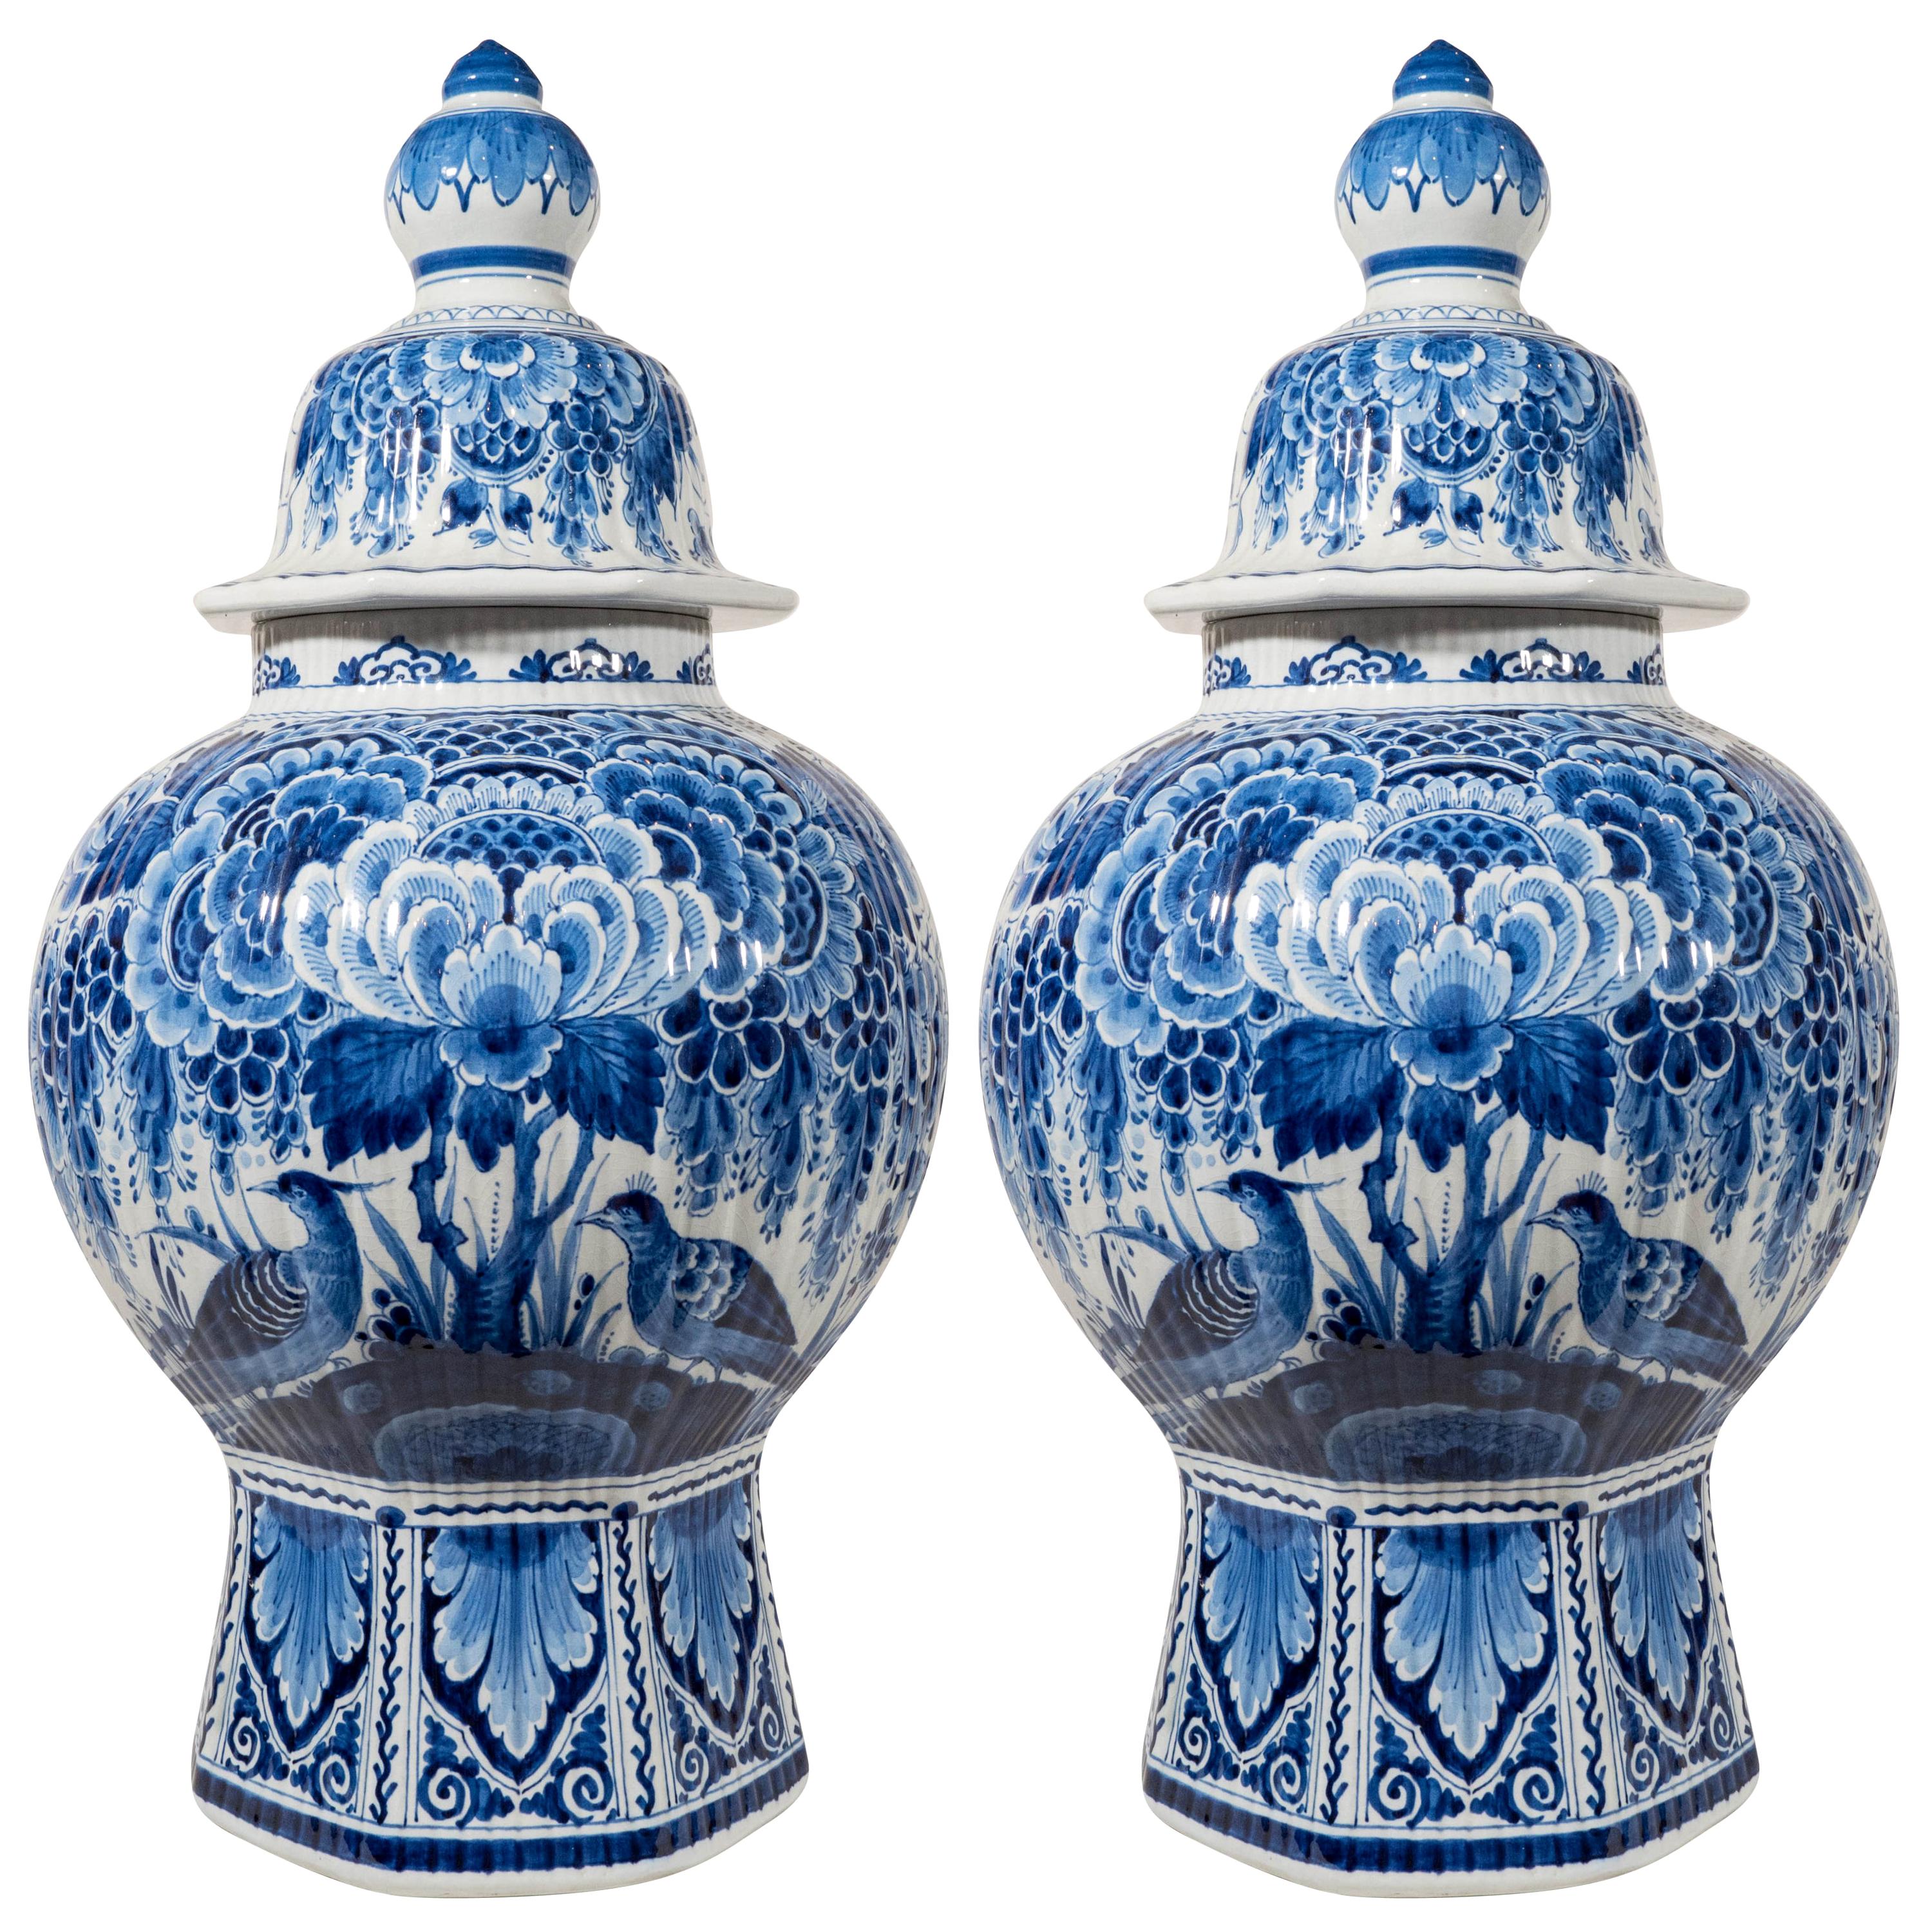 Pair of Large Dutch Delft Blue and White Covered Vases